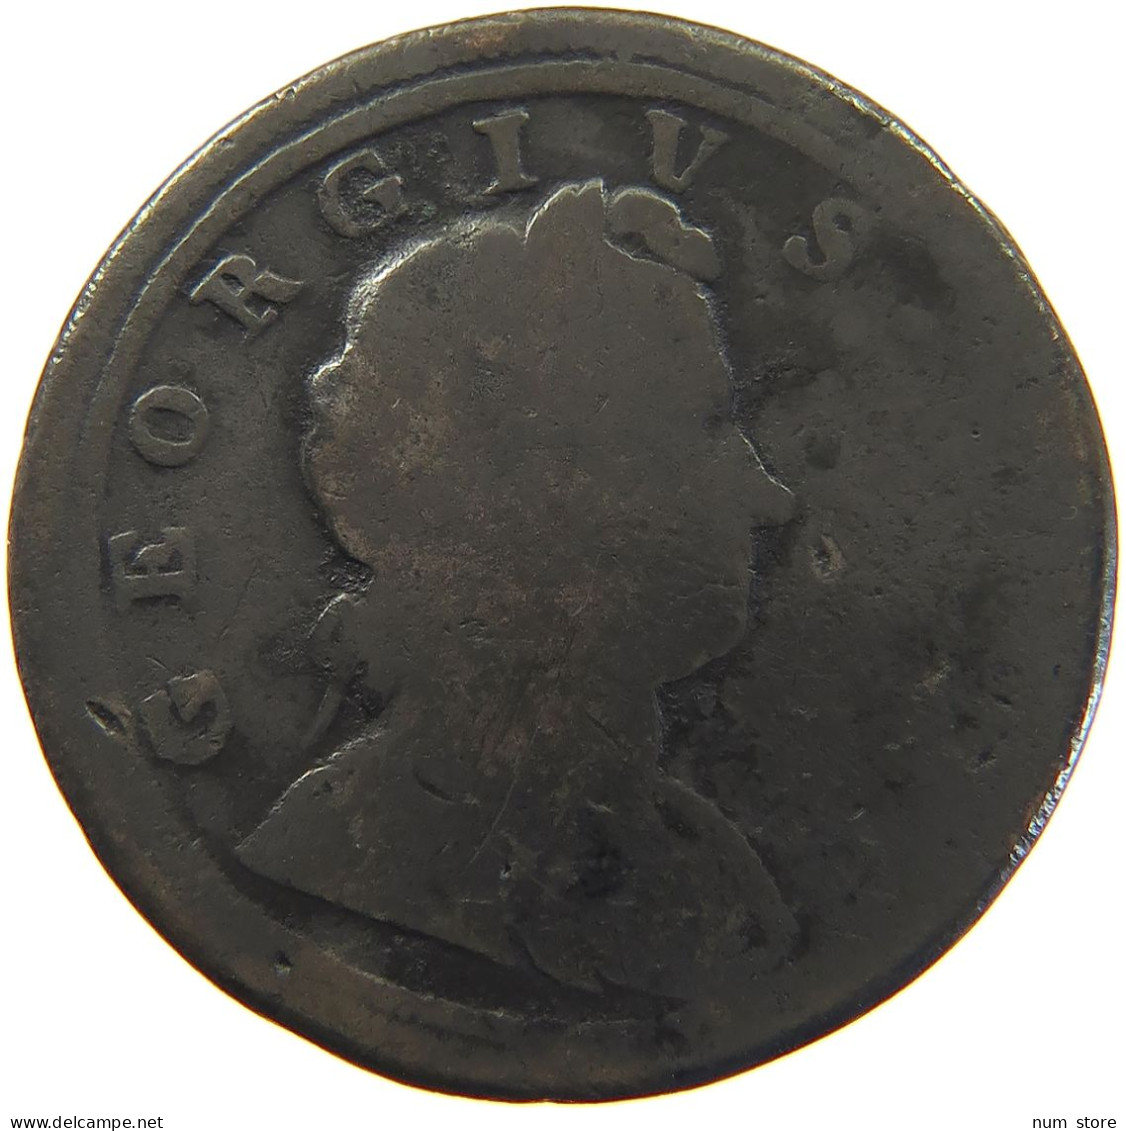 GREAT BRITAIN HALFPENNY 1721 George I. (1714-1727) #t155 0207 - B. 1/2 Penny